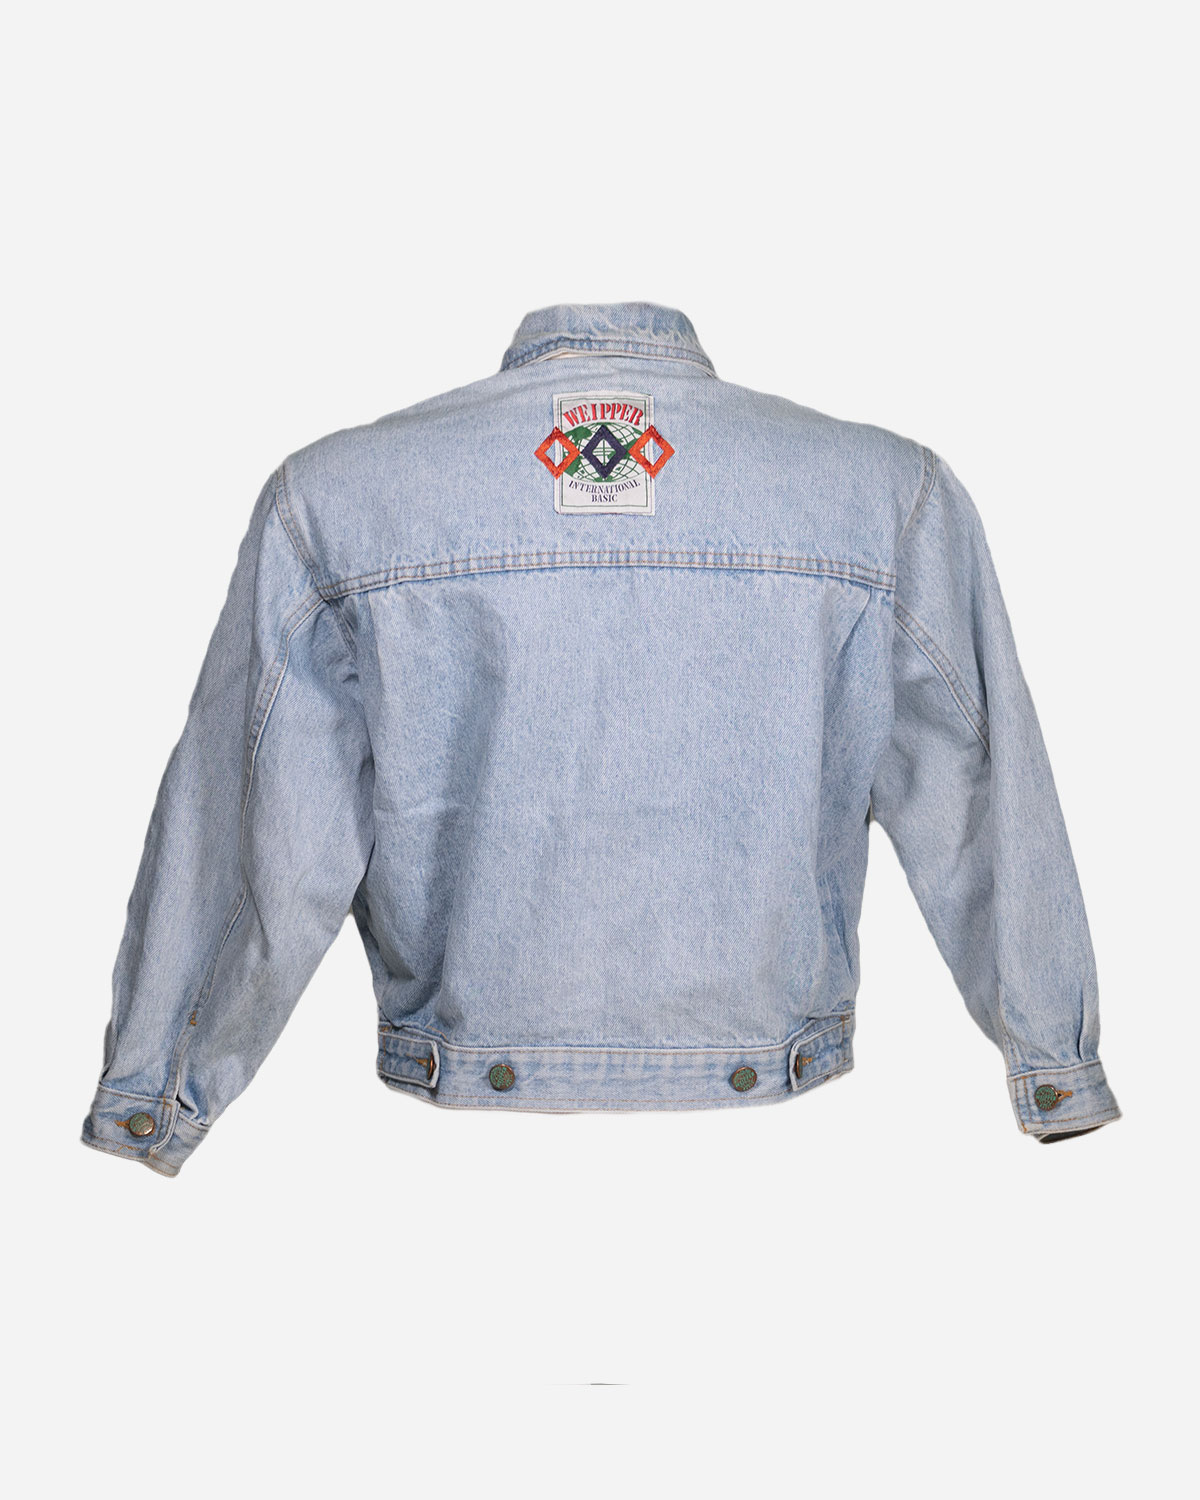 Box four denim jackets with patches